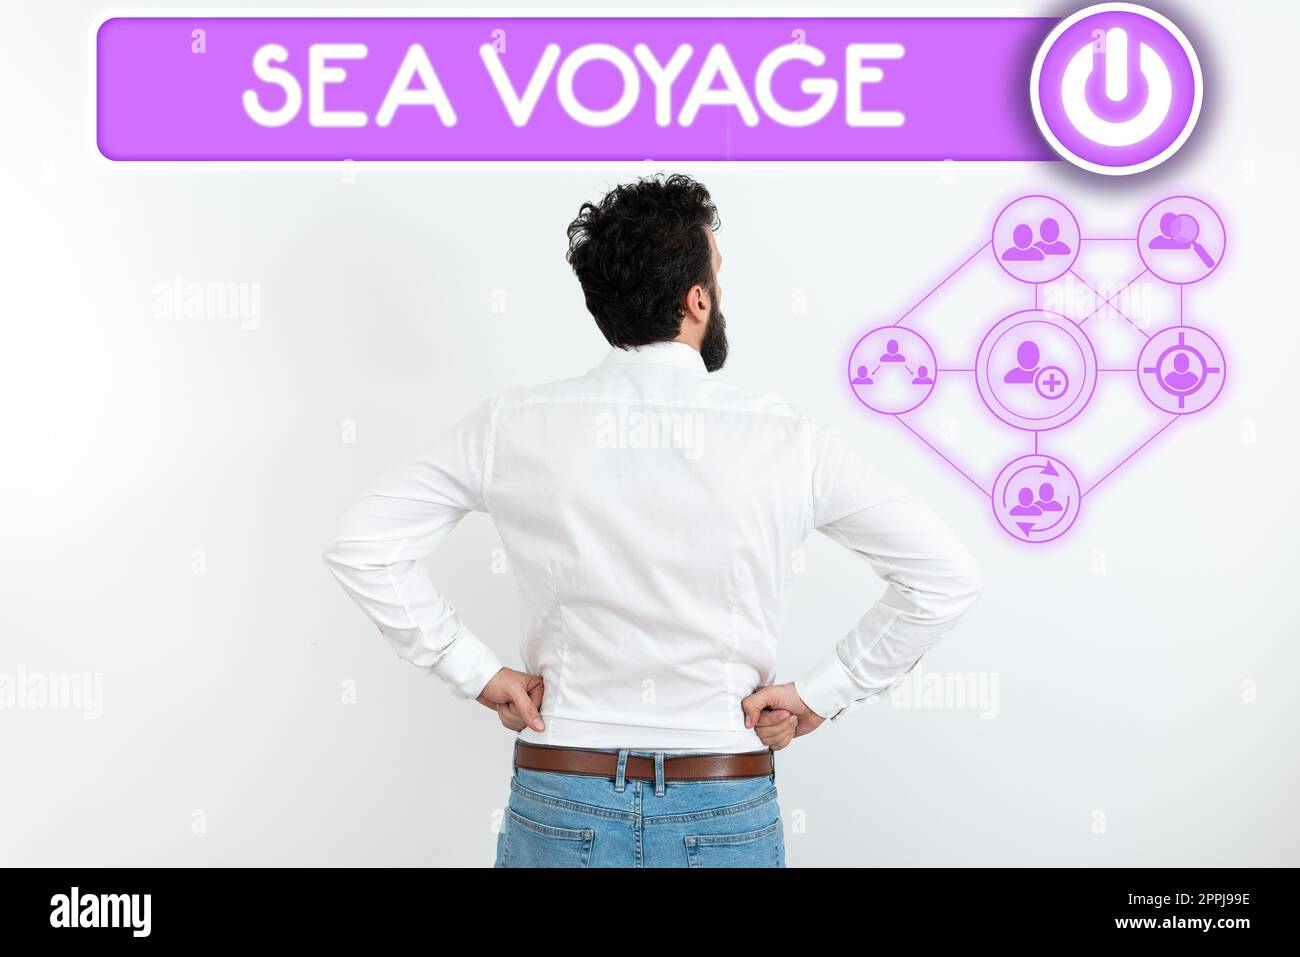 Text showing inspiration Sea Voyage. Word for riding on boat through oceans usually for coast countries Stock Photo